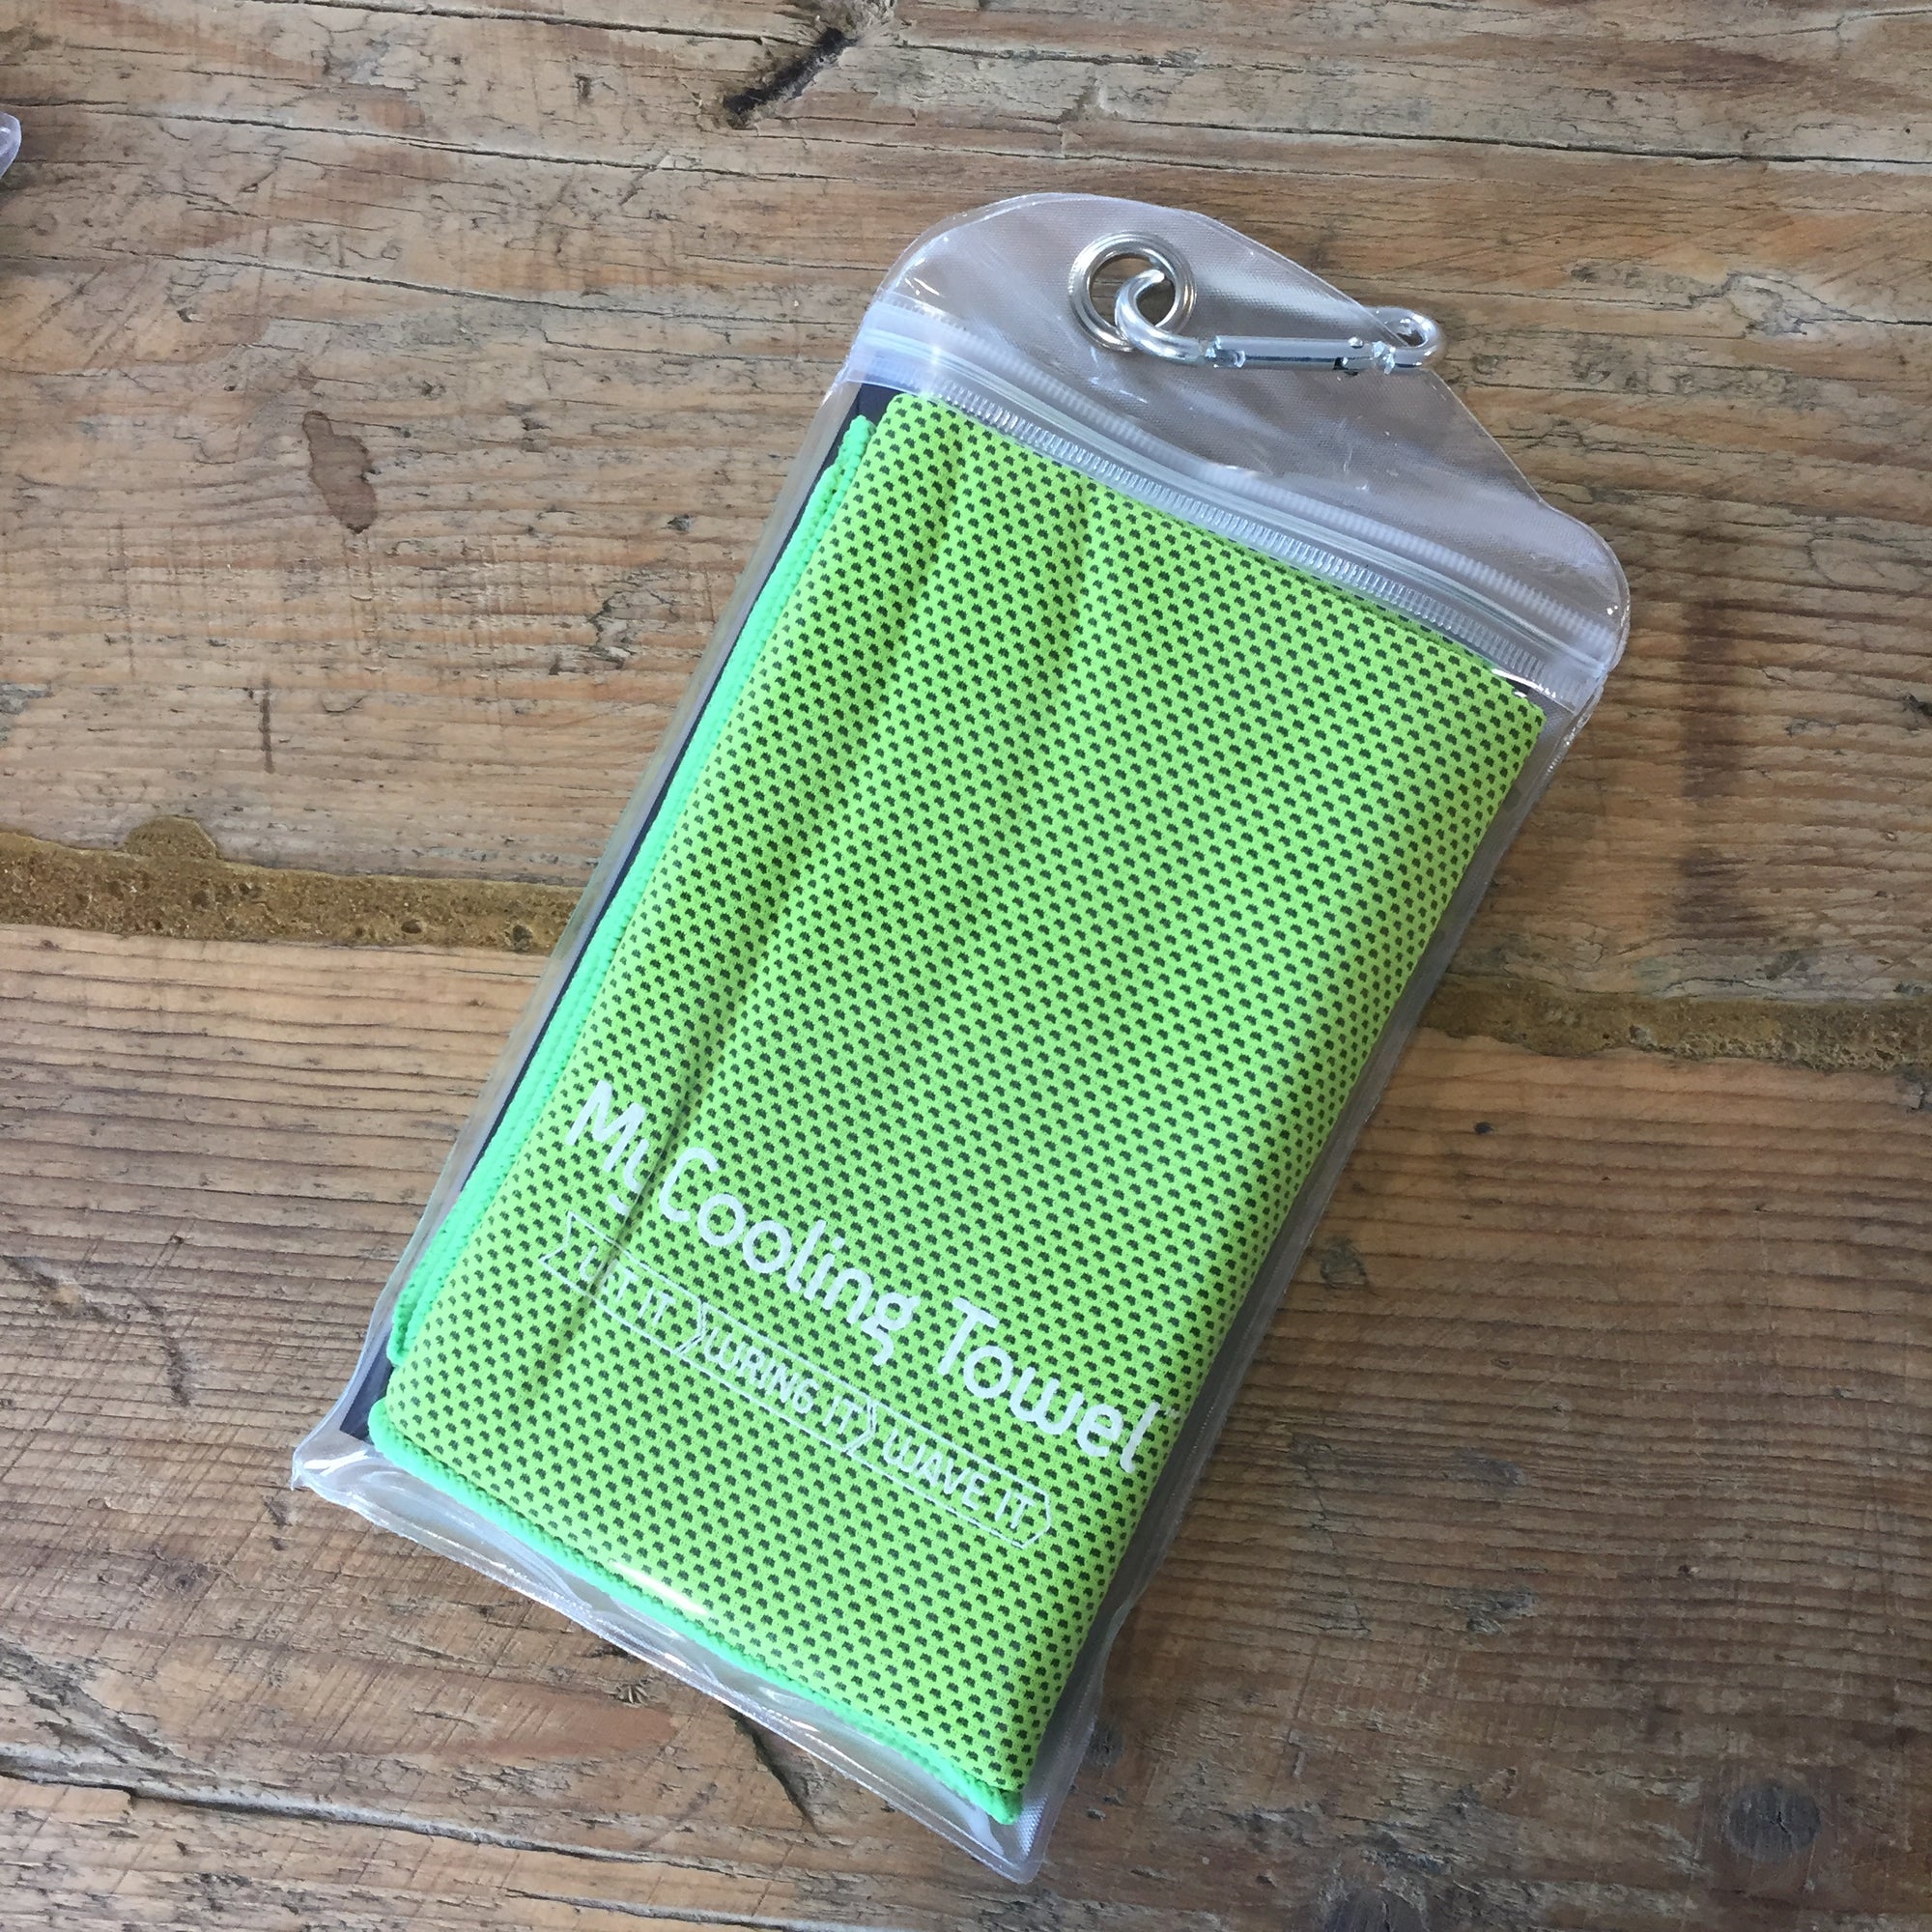 My Cooling Towel - now available in pouch format